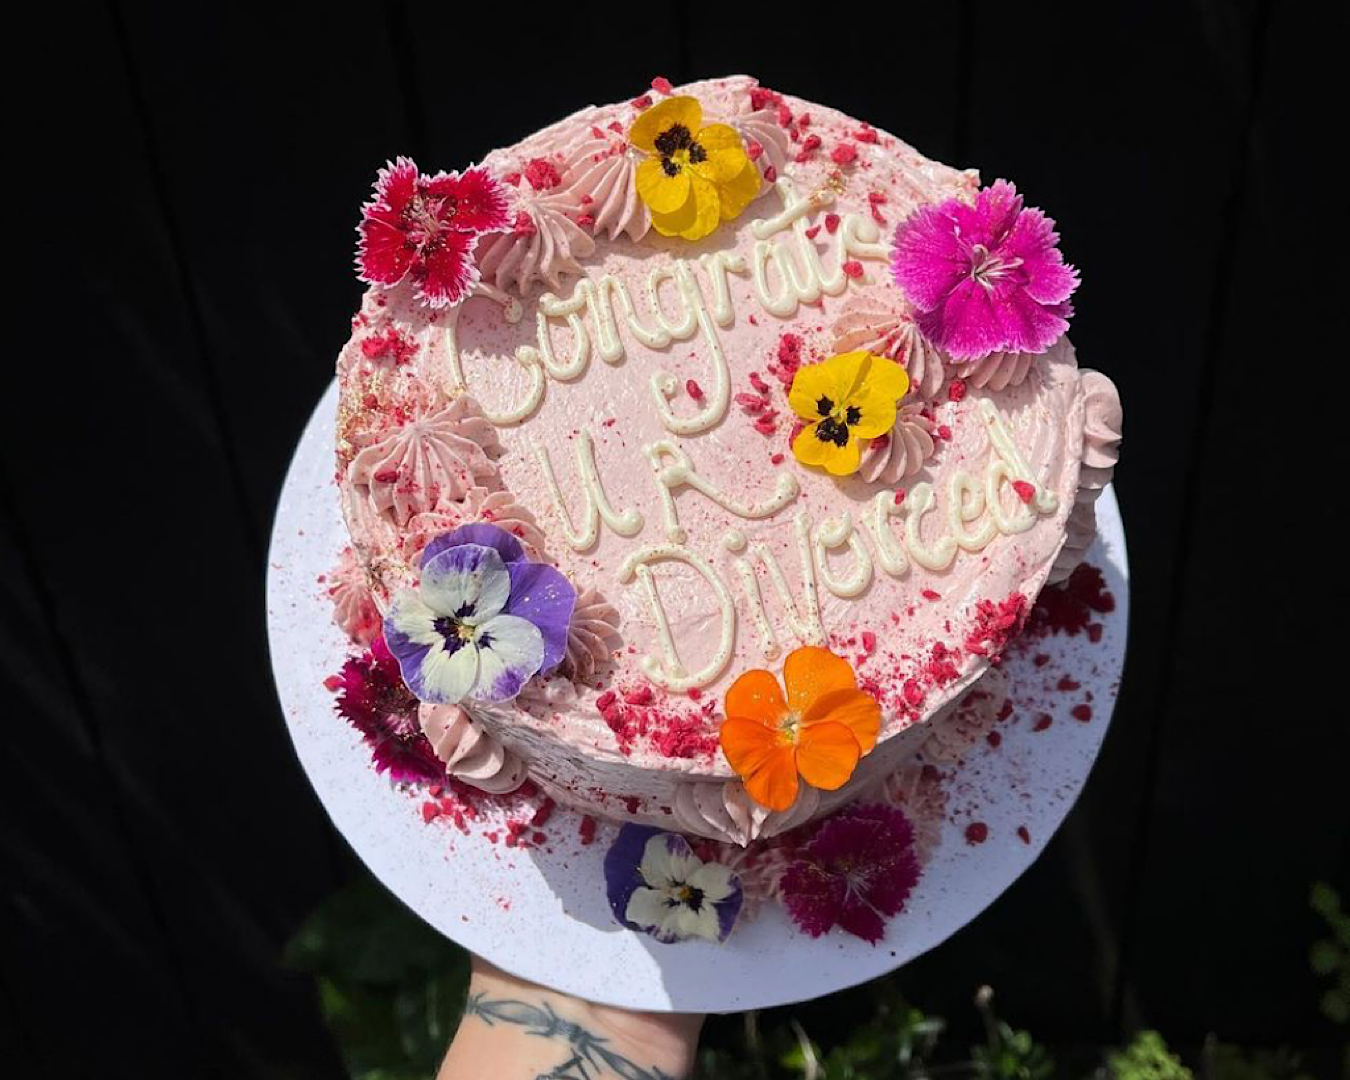 A pink cake decorated with the words “Congrats ur divorced” and fresh flowers.